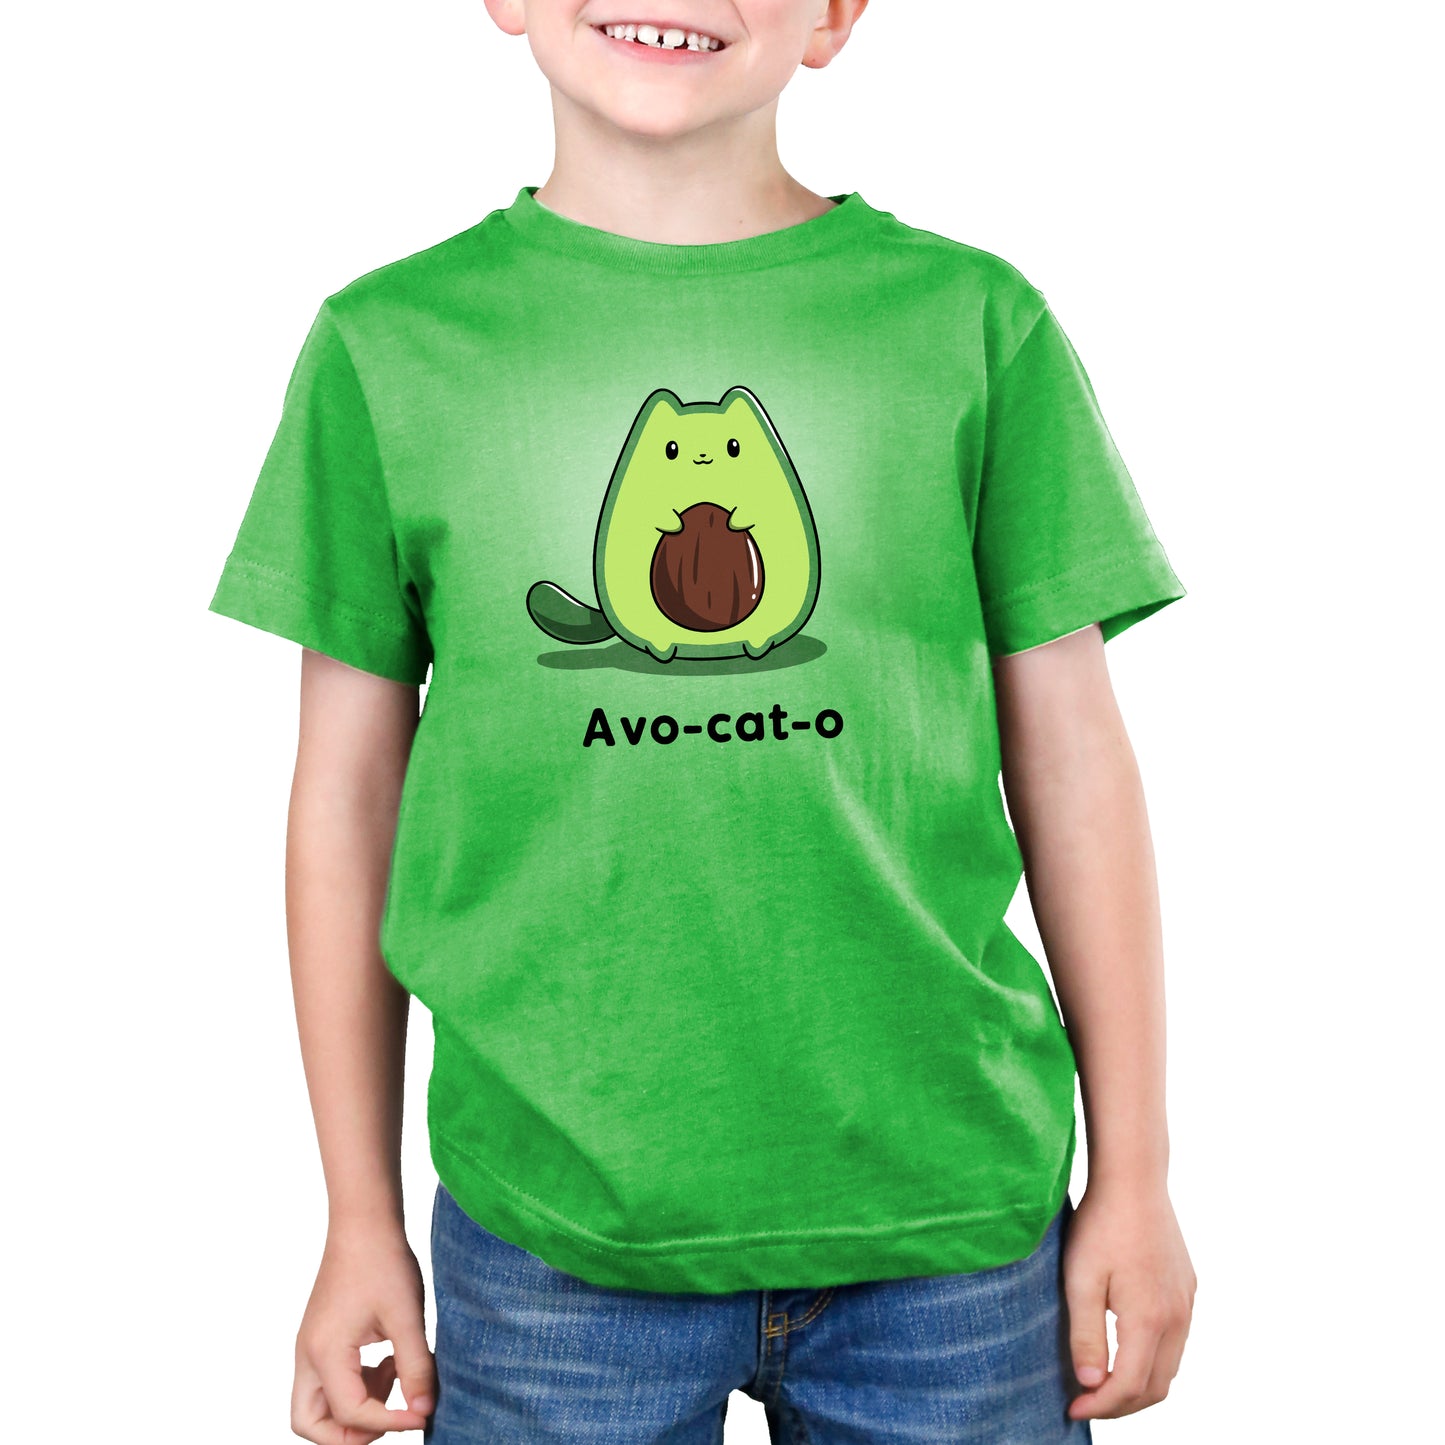 A young boy wearing a green t-shirt with an Avo-cat-o design by TeeTurtle.